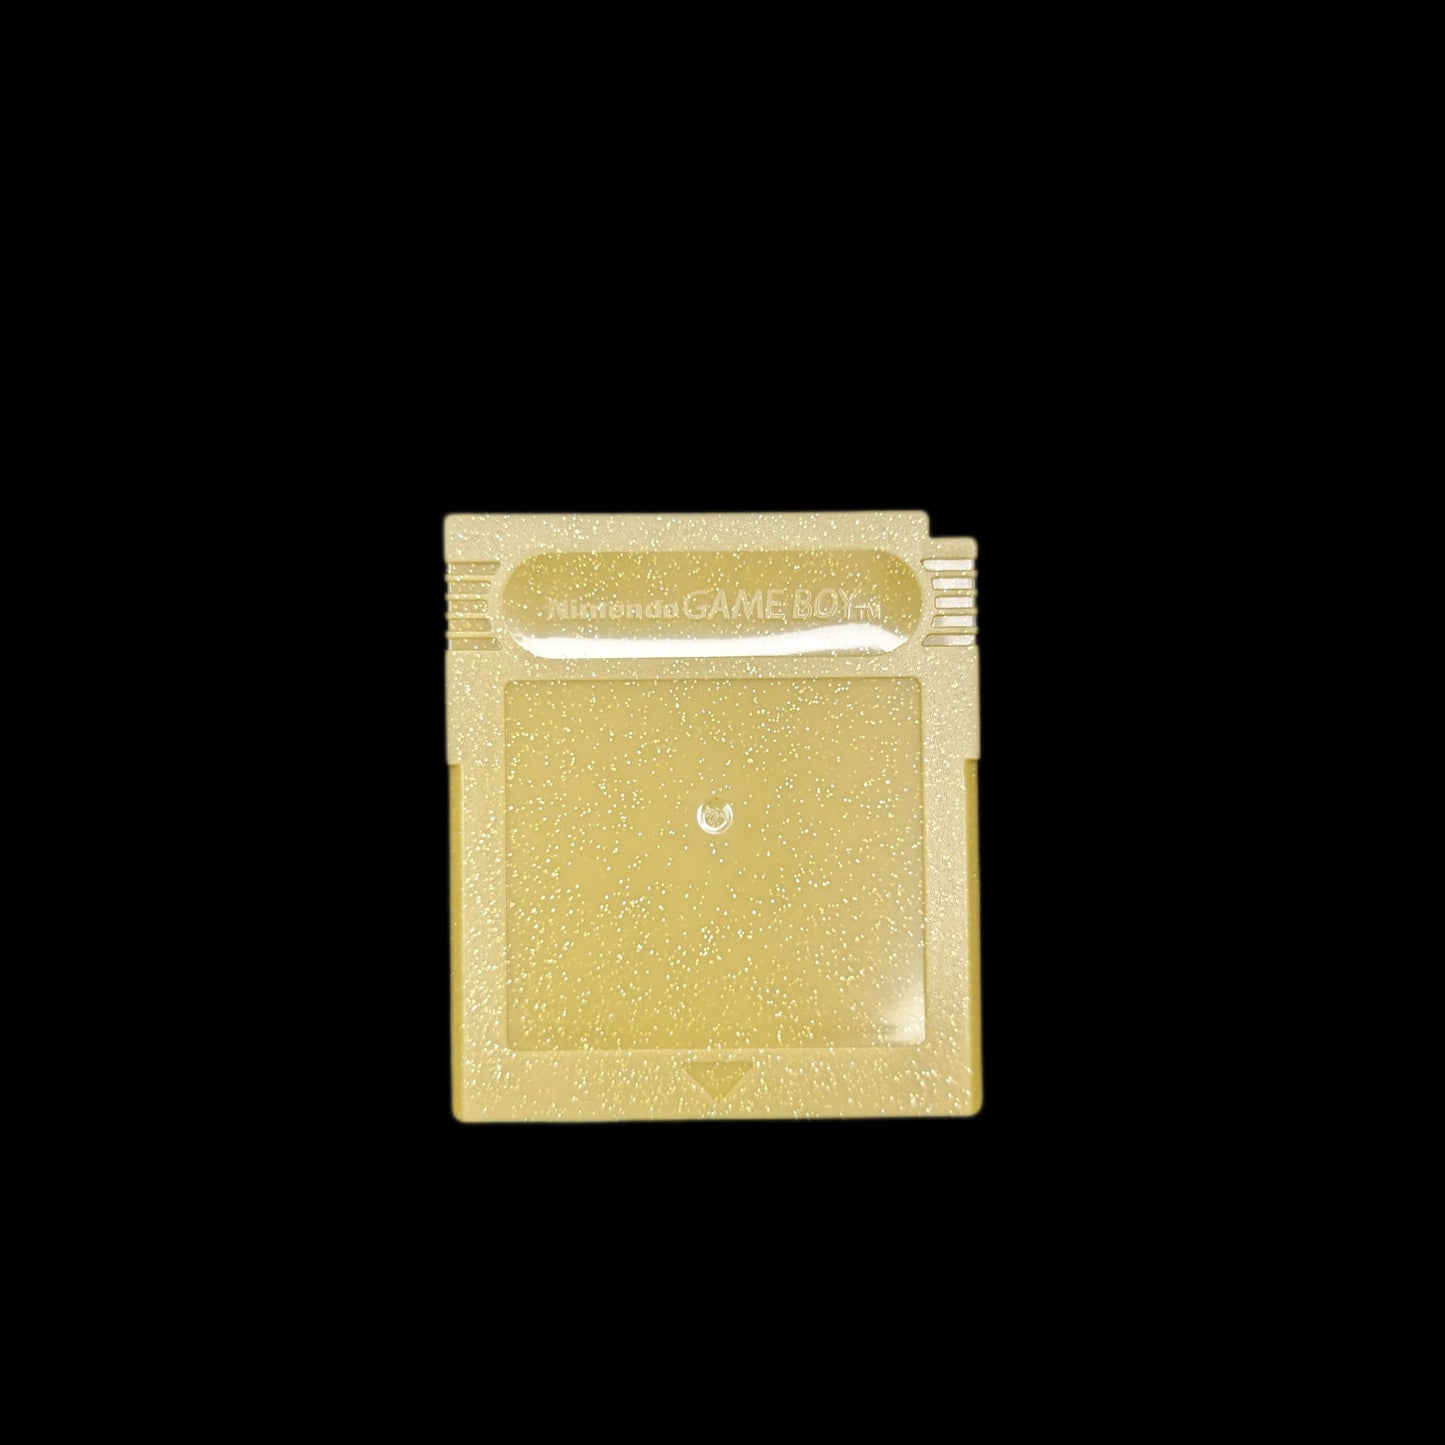 Alternative Cartridge Shells for Gameboy and Gameboy Color Games